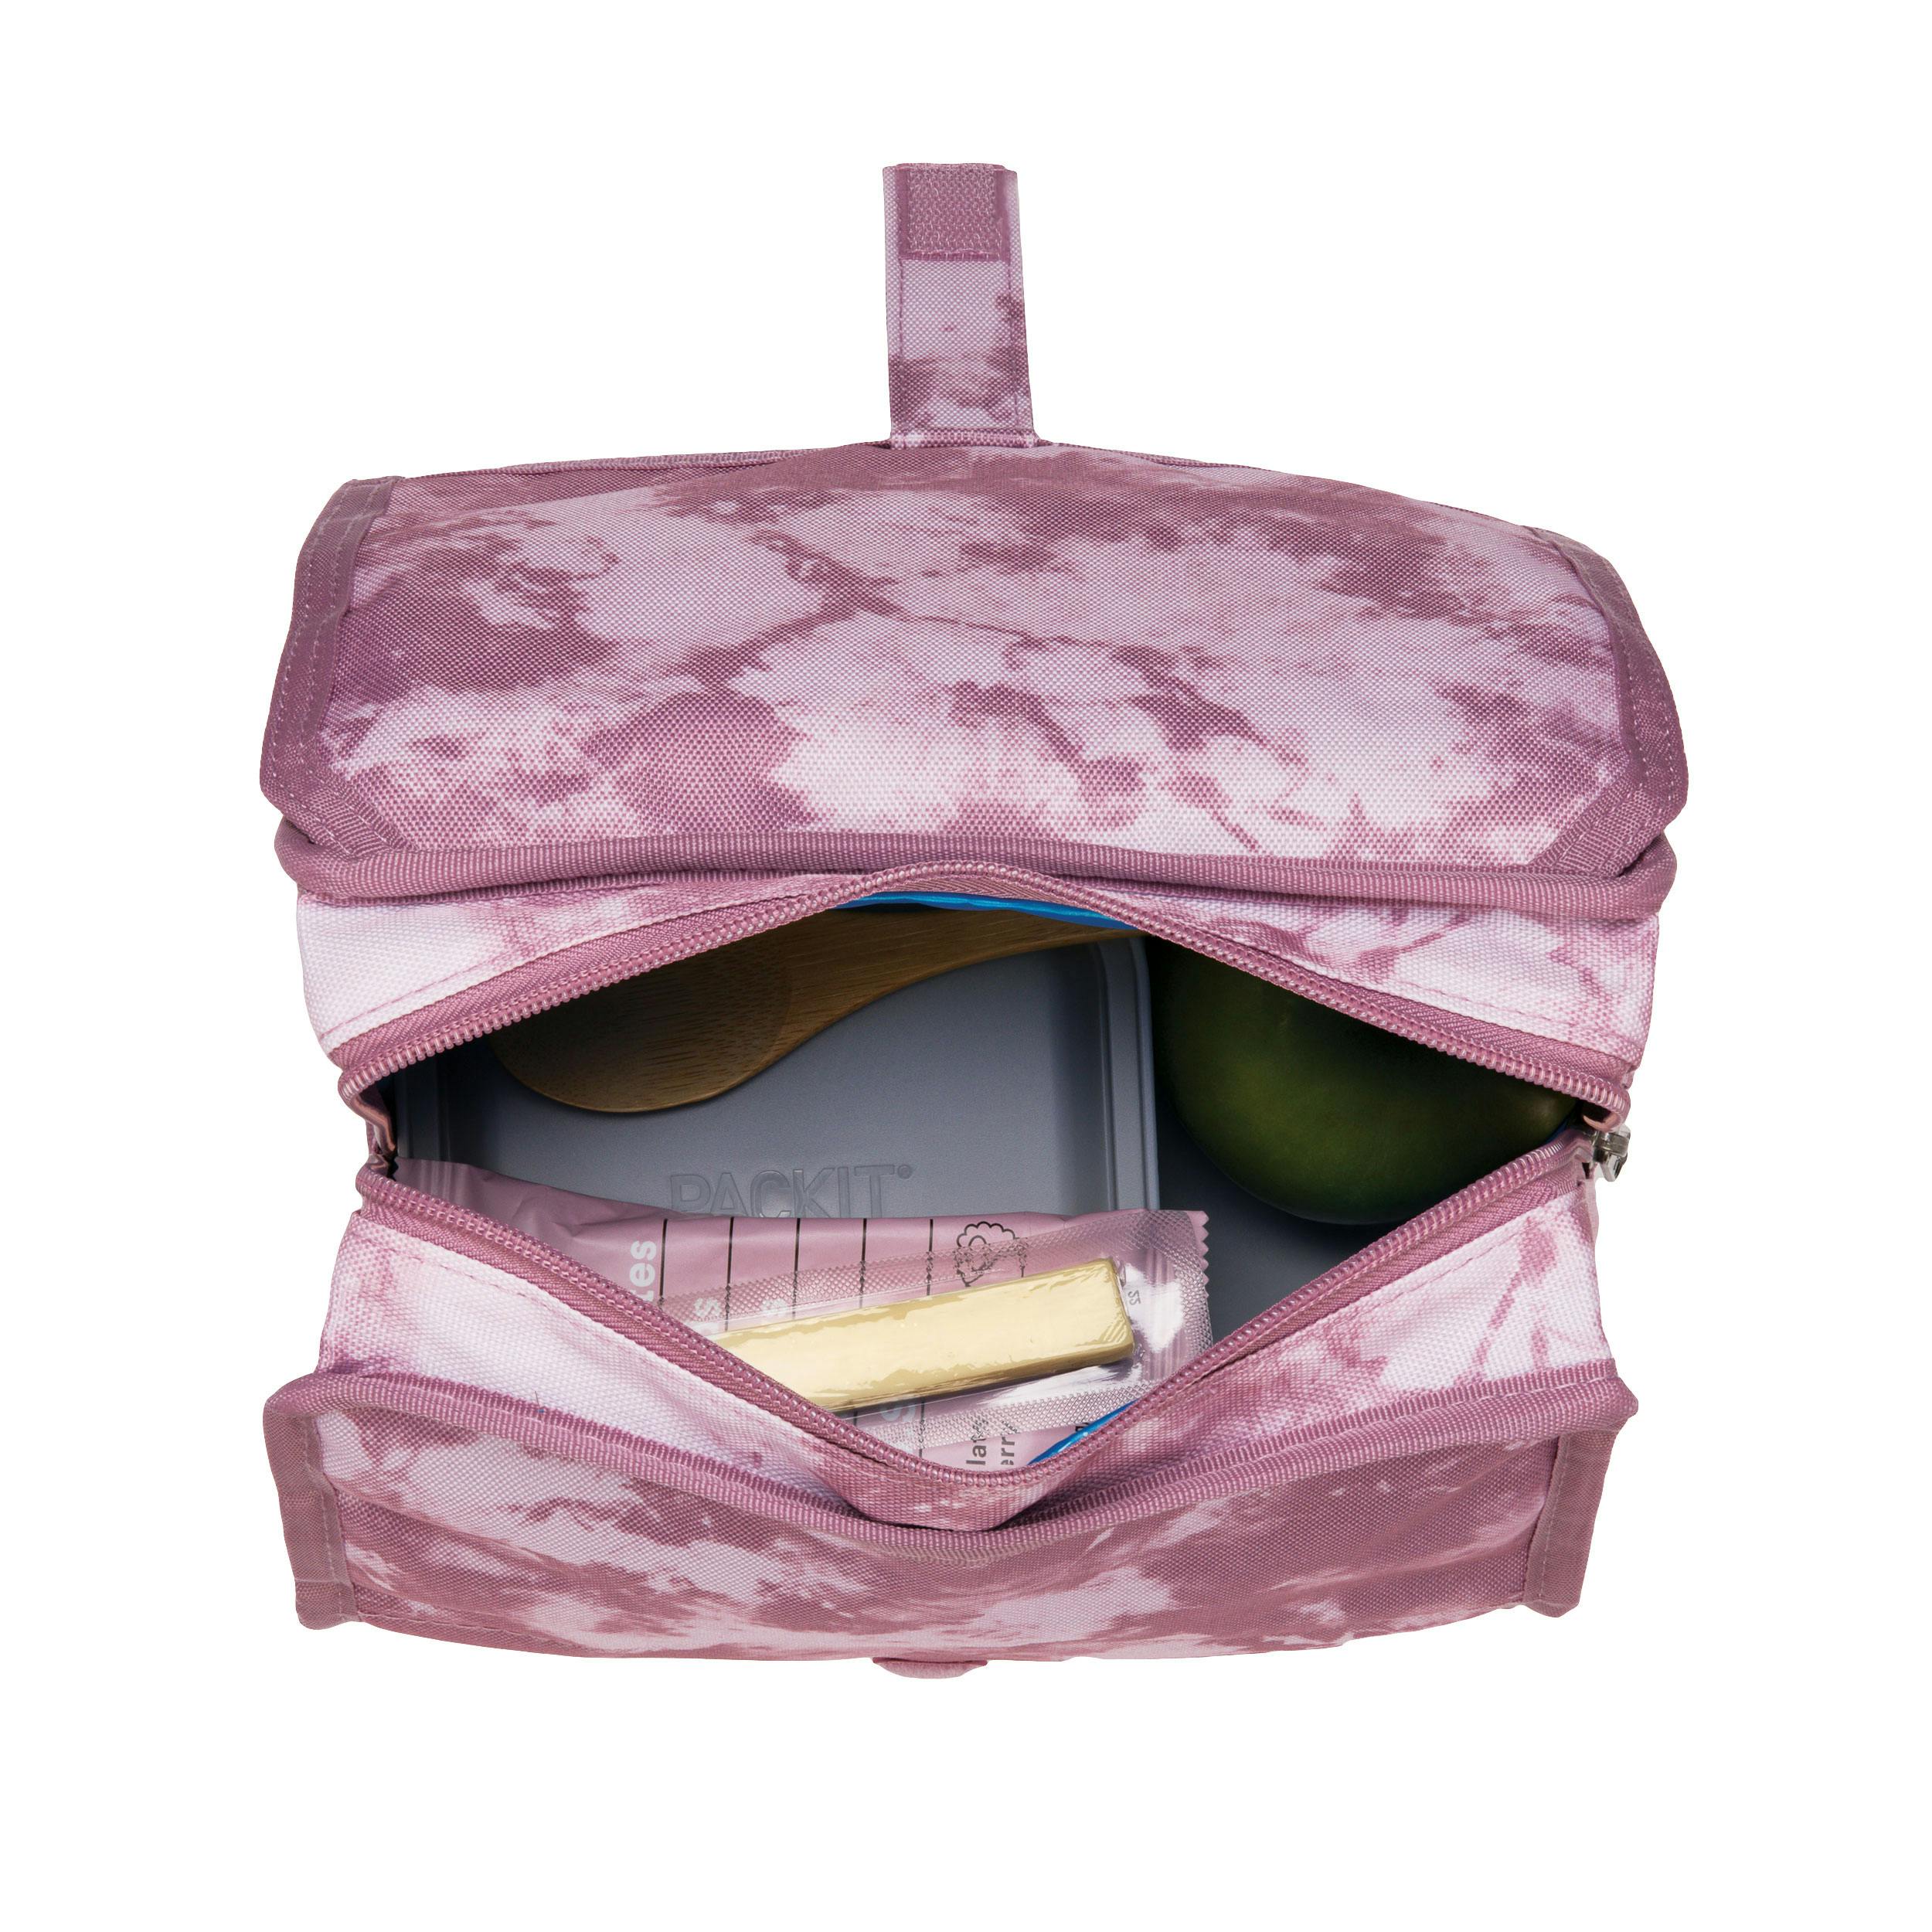 https://hipvan-images-production.imgix.net/product-images/8ae799c0-b606-4f4a-9f38-5ffed1756c01/Packit--PackIt-Freezable-Lunch-Bag--Mulberry-7.png?auto=format%2Ccompress&fm=jpg&cs=srgb&ar=1%3A1&fit=fill&bg=ffffff&ixlib=react-9.5.4